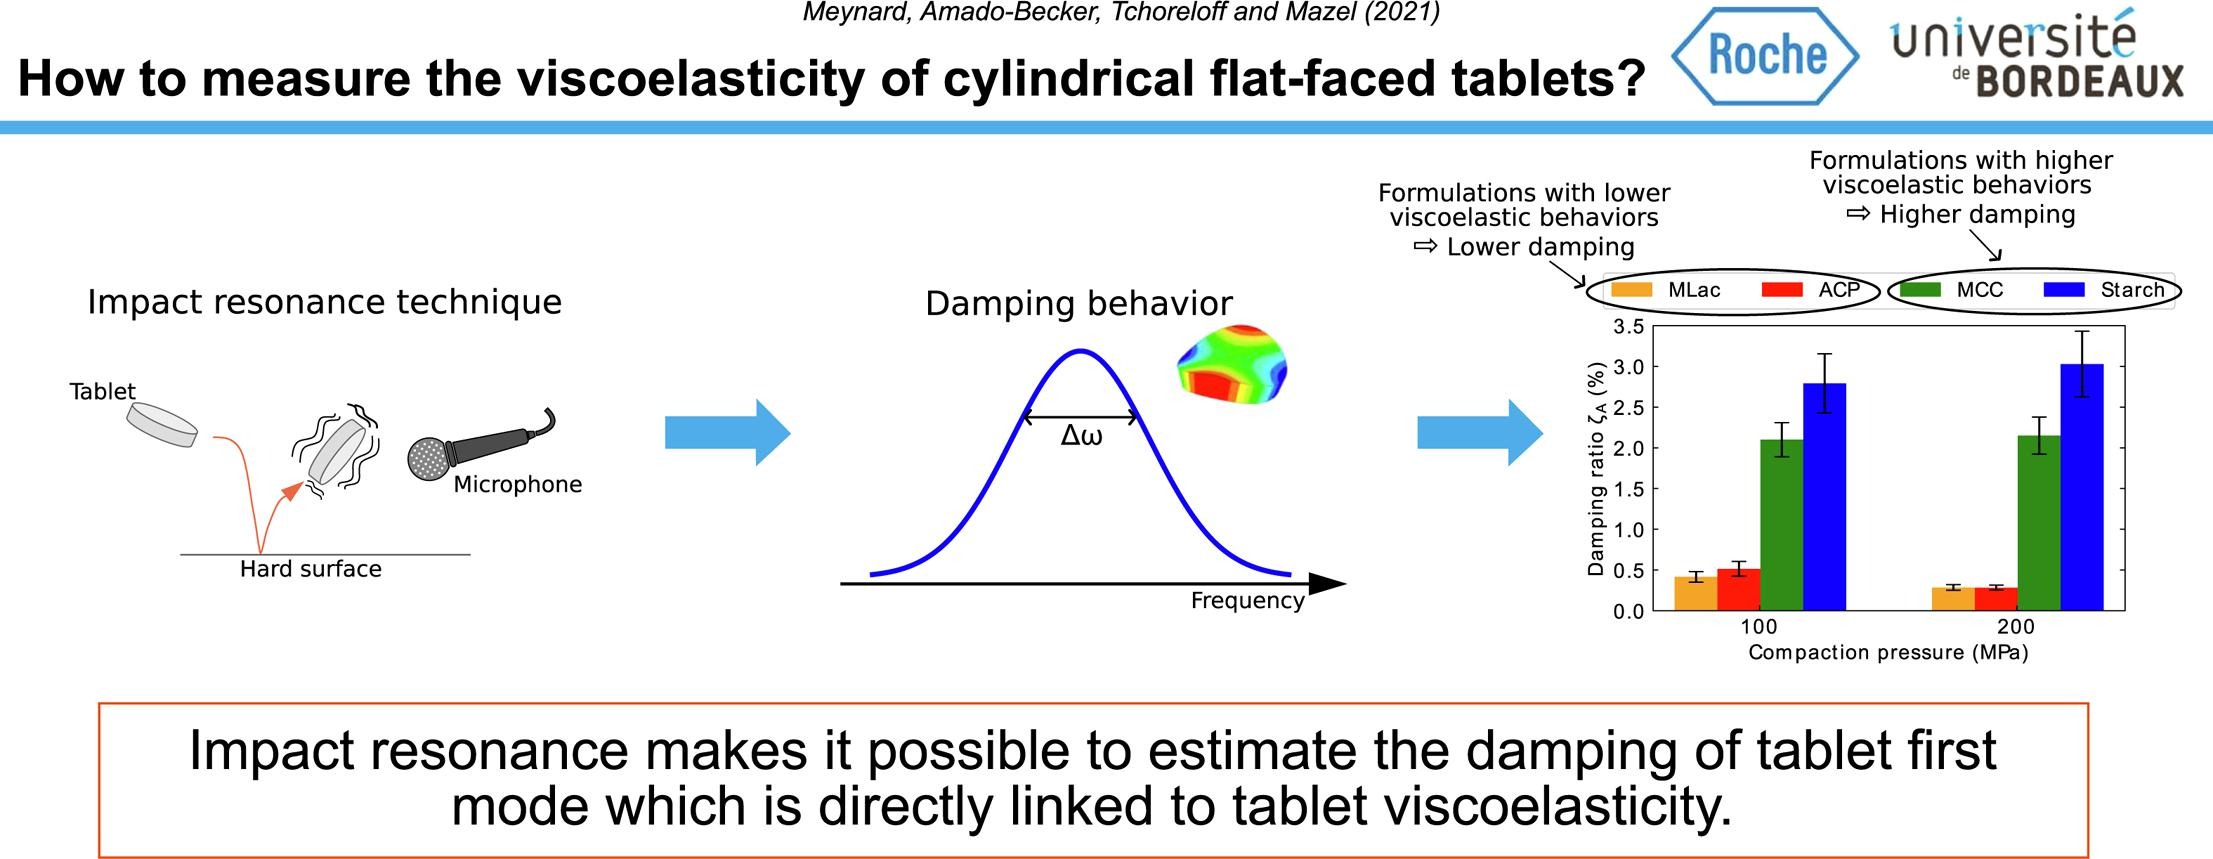 Characterization of the viscoelasticity of pharmaceutical tablets using impulse excitation technique